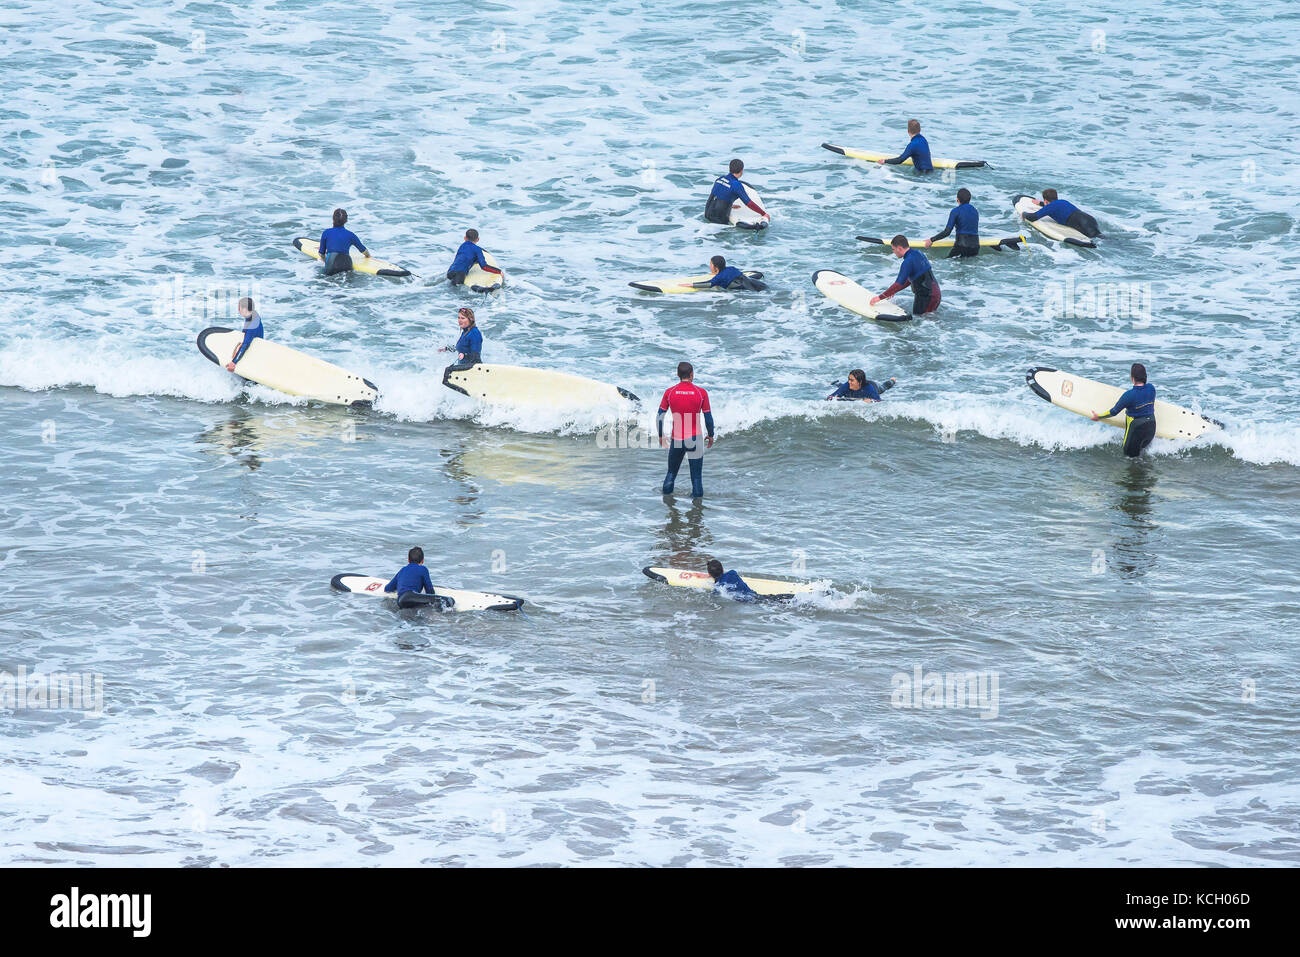 Surfing in Cornwall UK - young people enjoying learning how to surf with help from a surfing instructor. Stock Photo